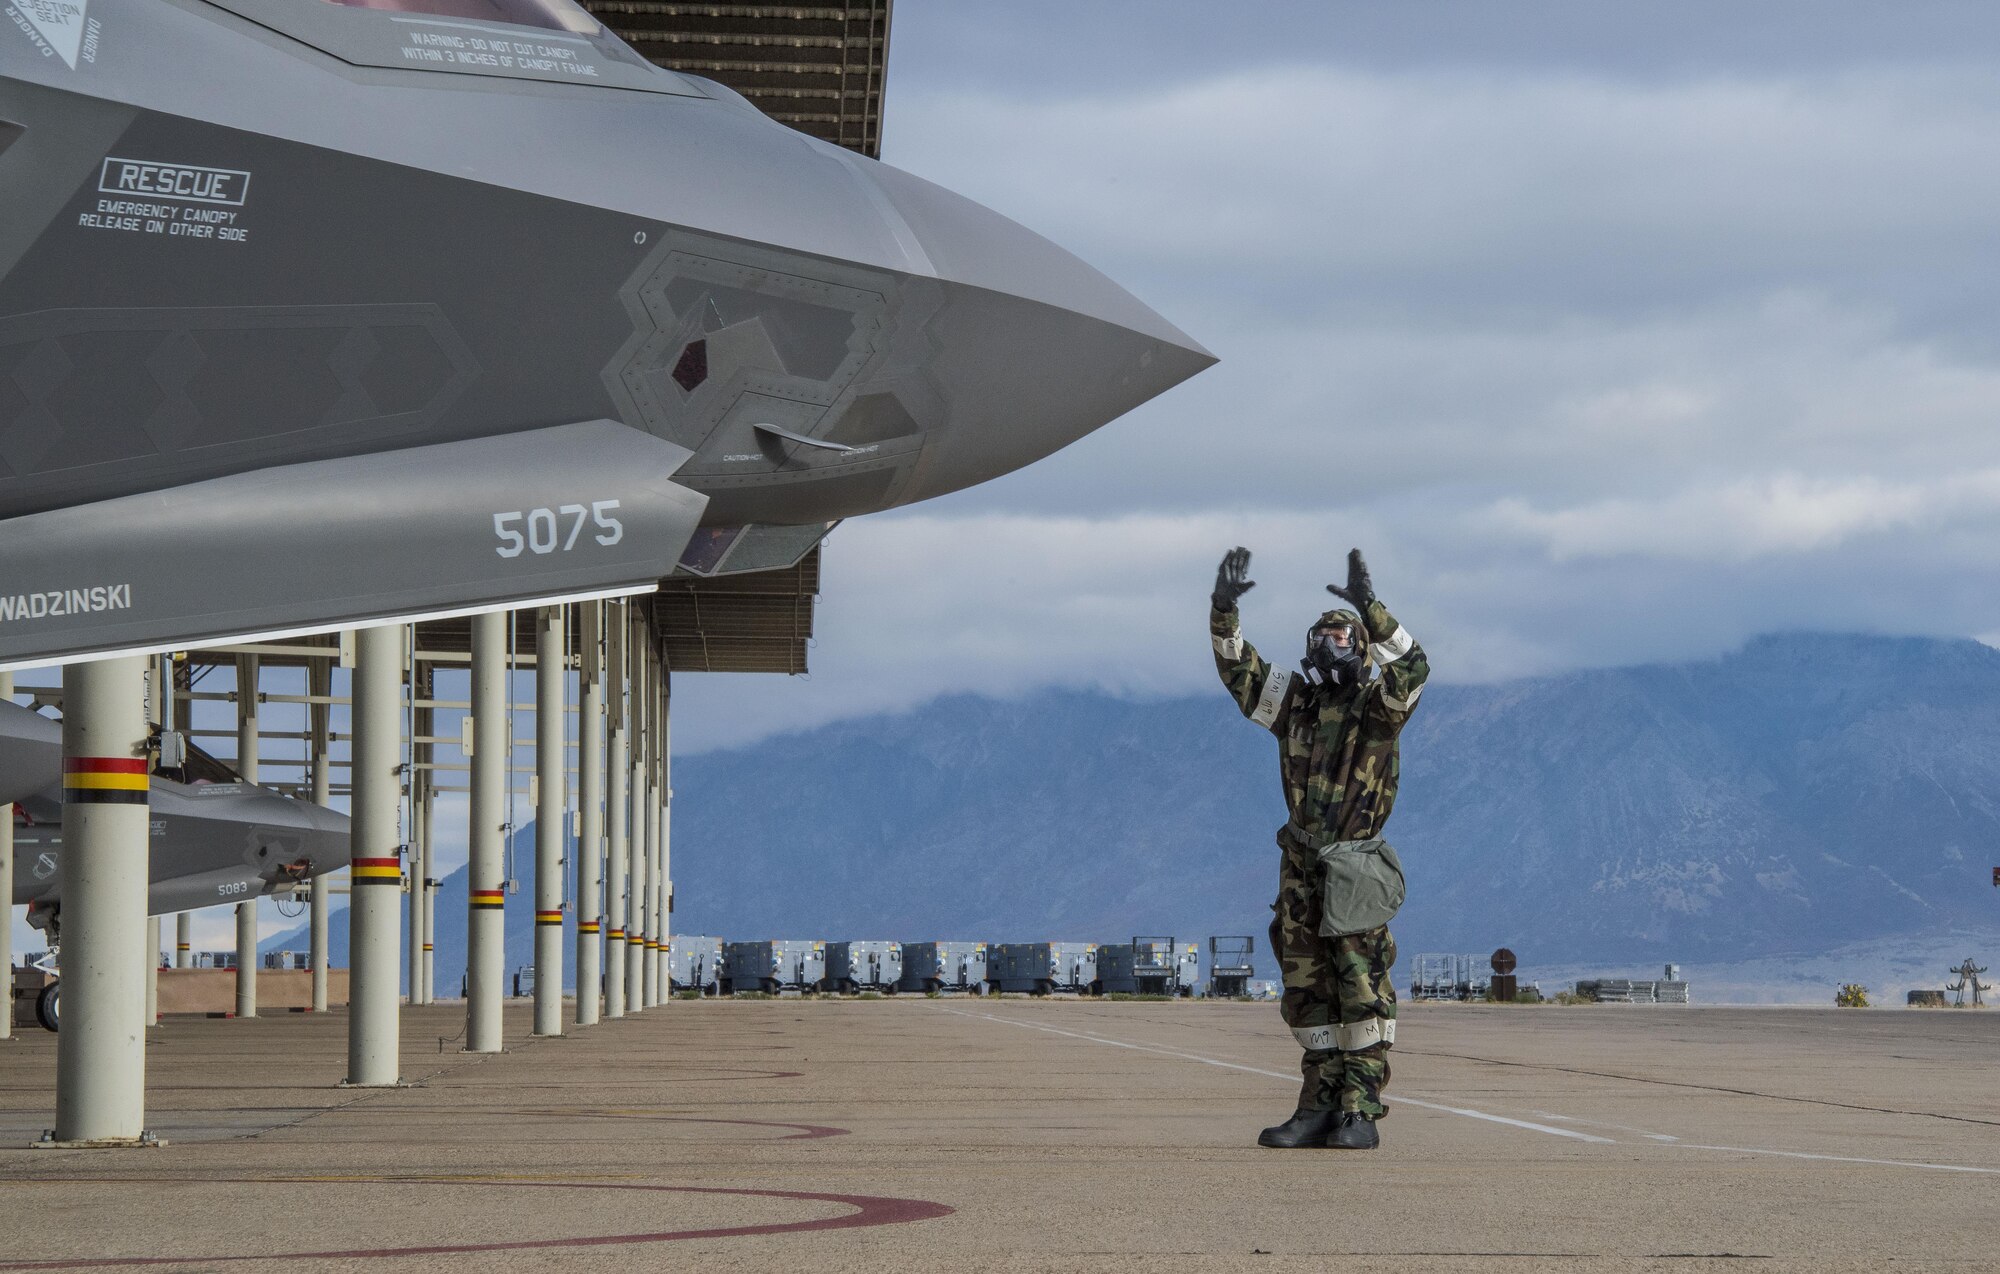 Tech. Sgt. Lance Dooley, a crew chief in the 419th Aircraft Maintenance Squadron, signals to the pilot of an F-35 Lightning II